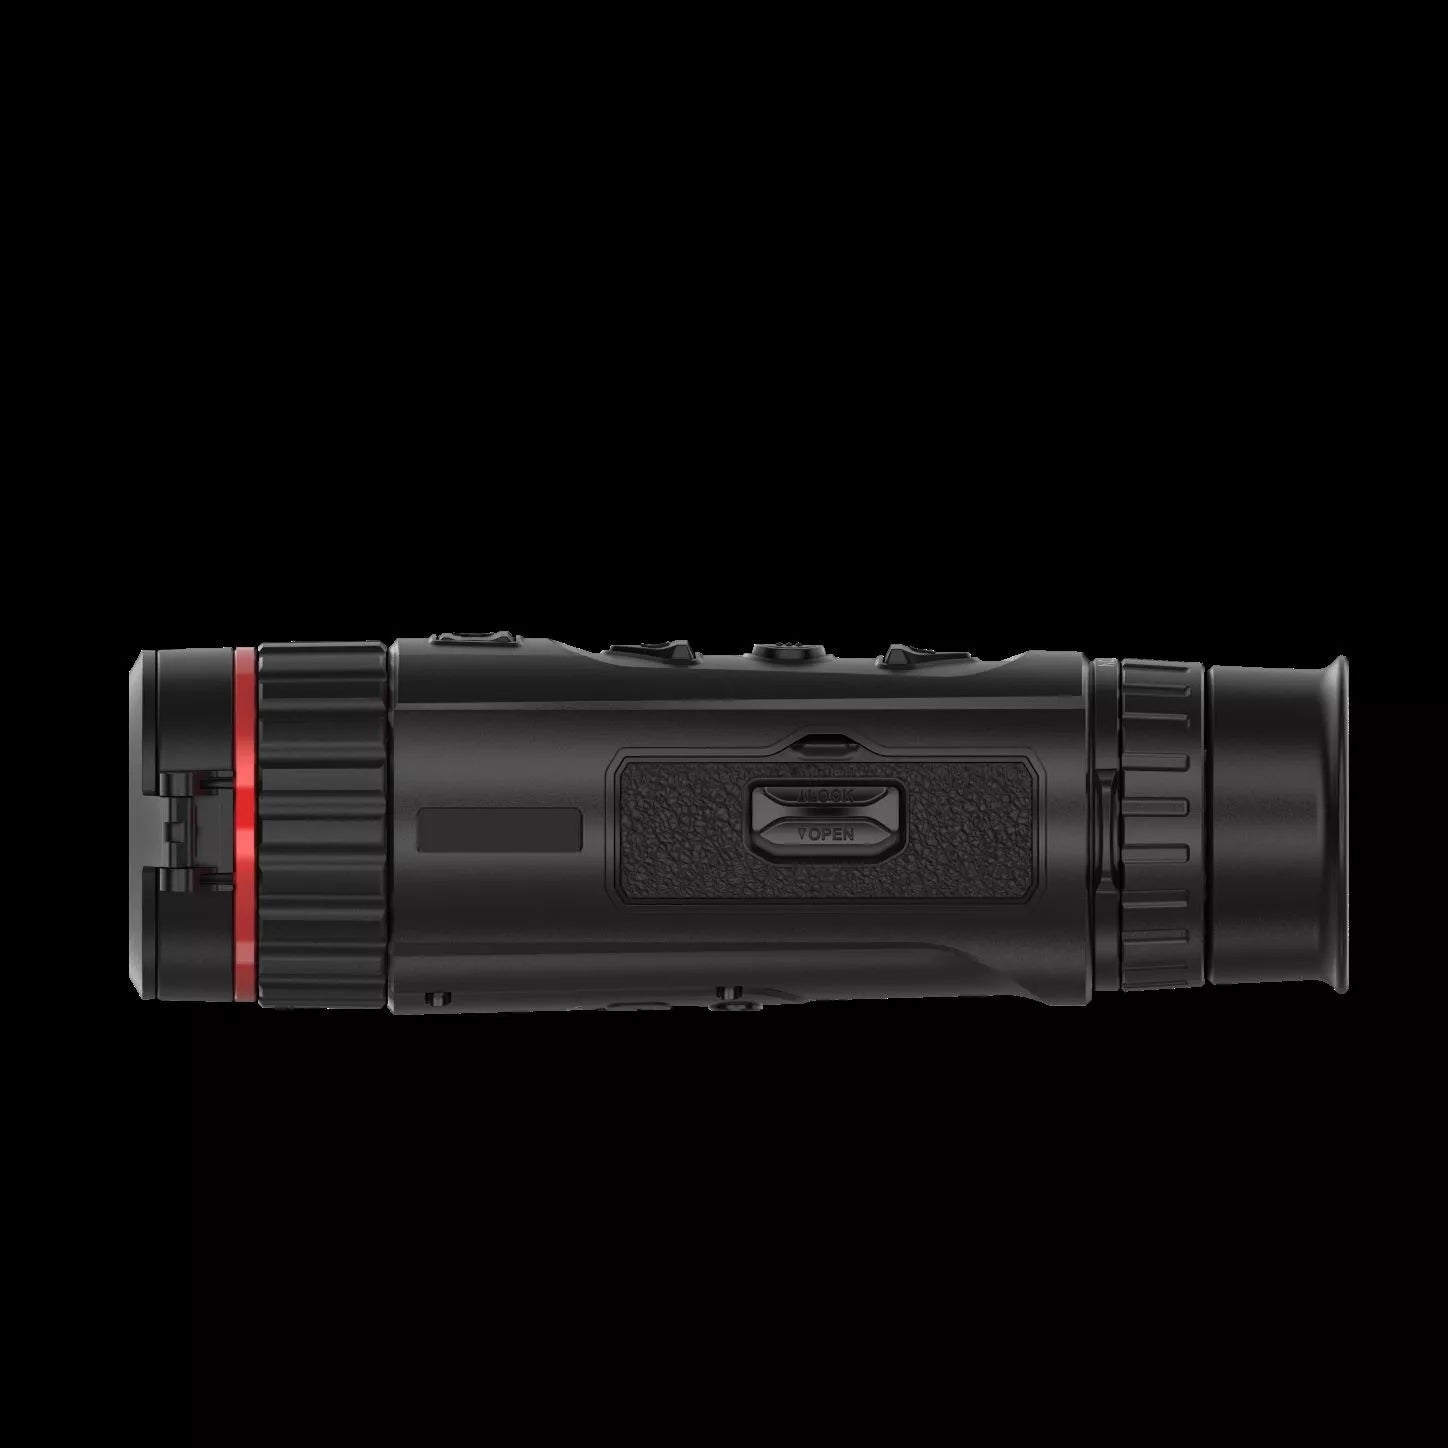 Clearance Hikmicro Falcon Pro FQ35 Hand Held Thermal Imager